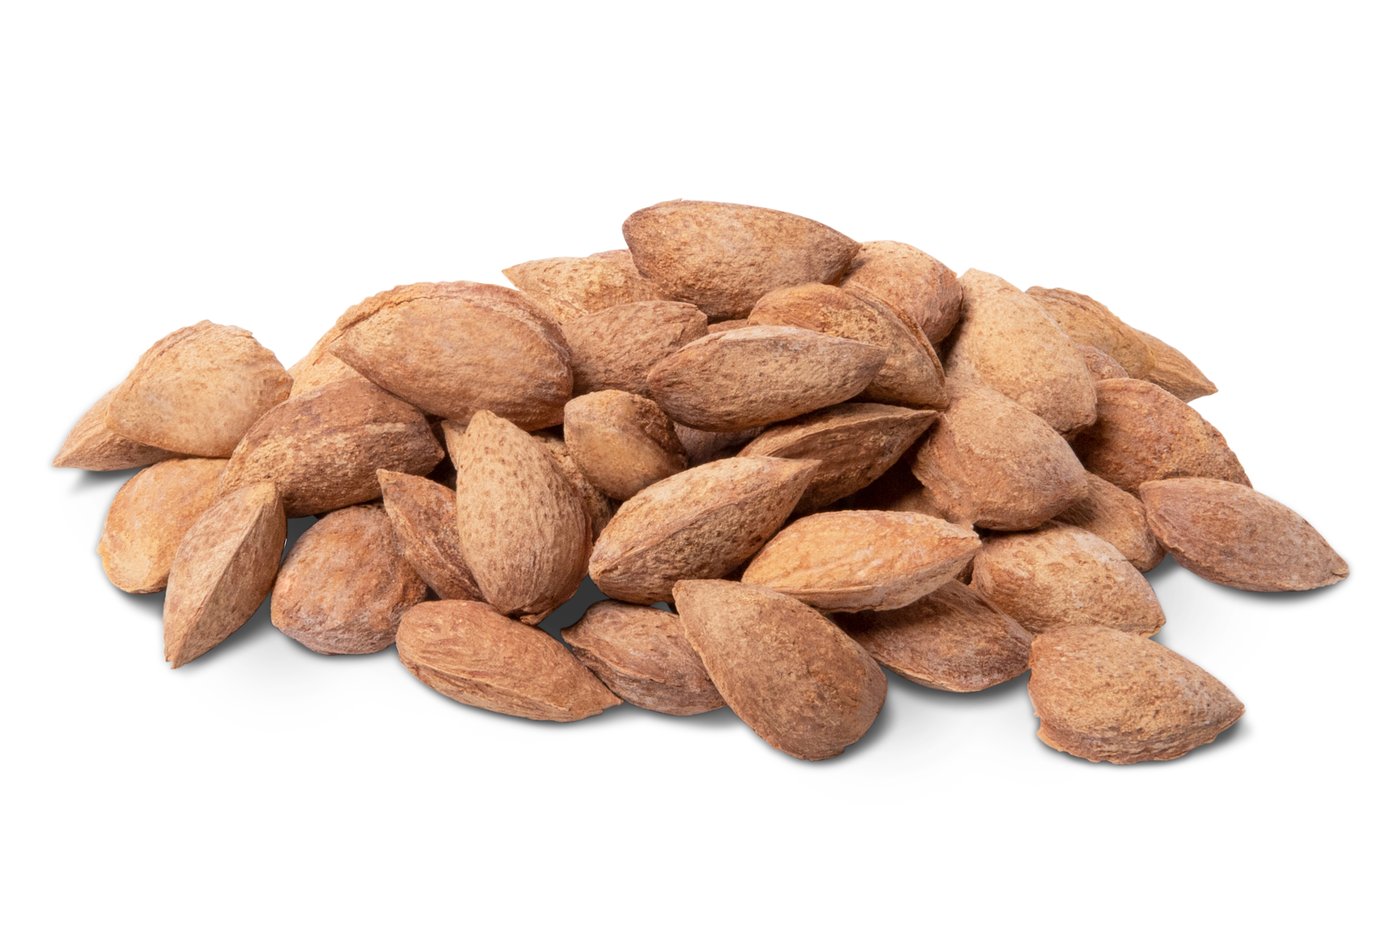 Roasted Almonds (Salted, In Shell) image zoom